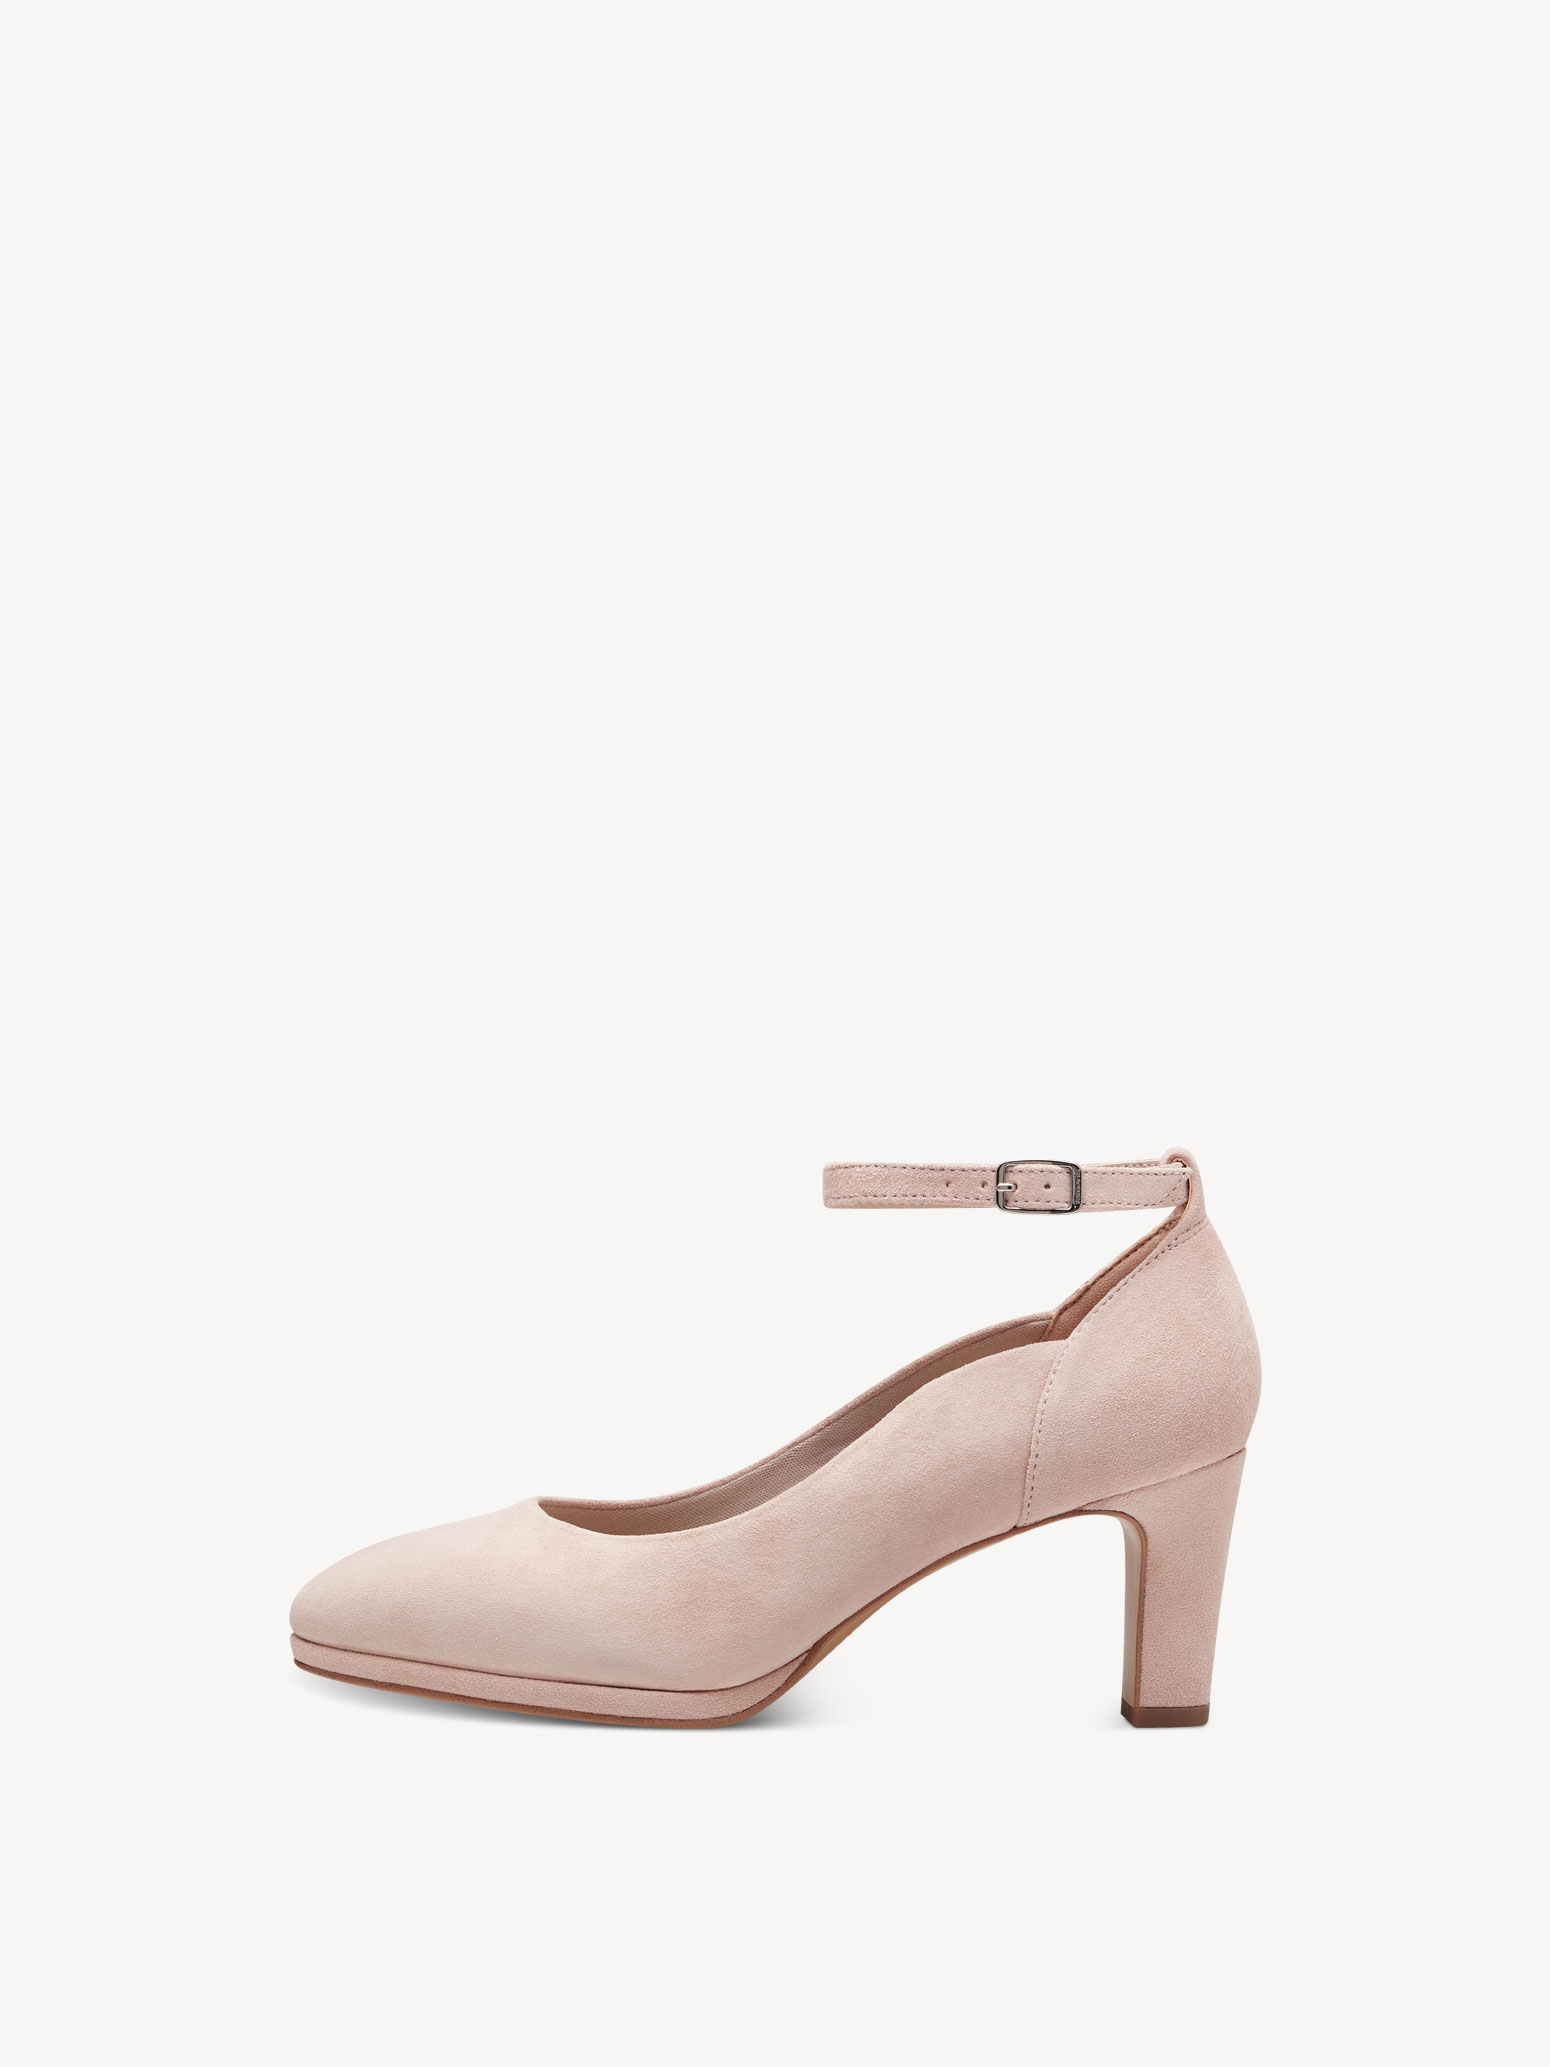 Leather Pumps - rose